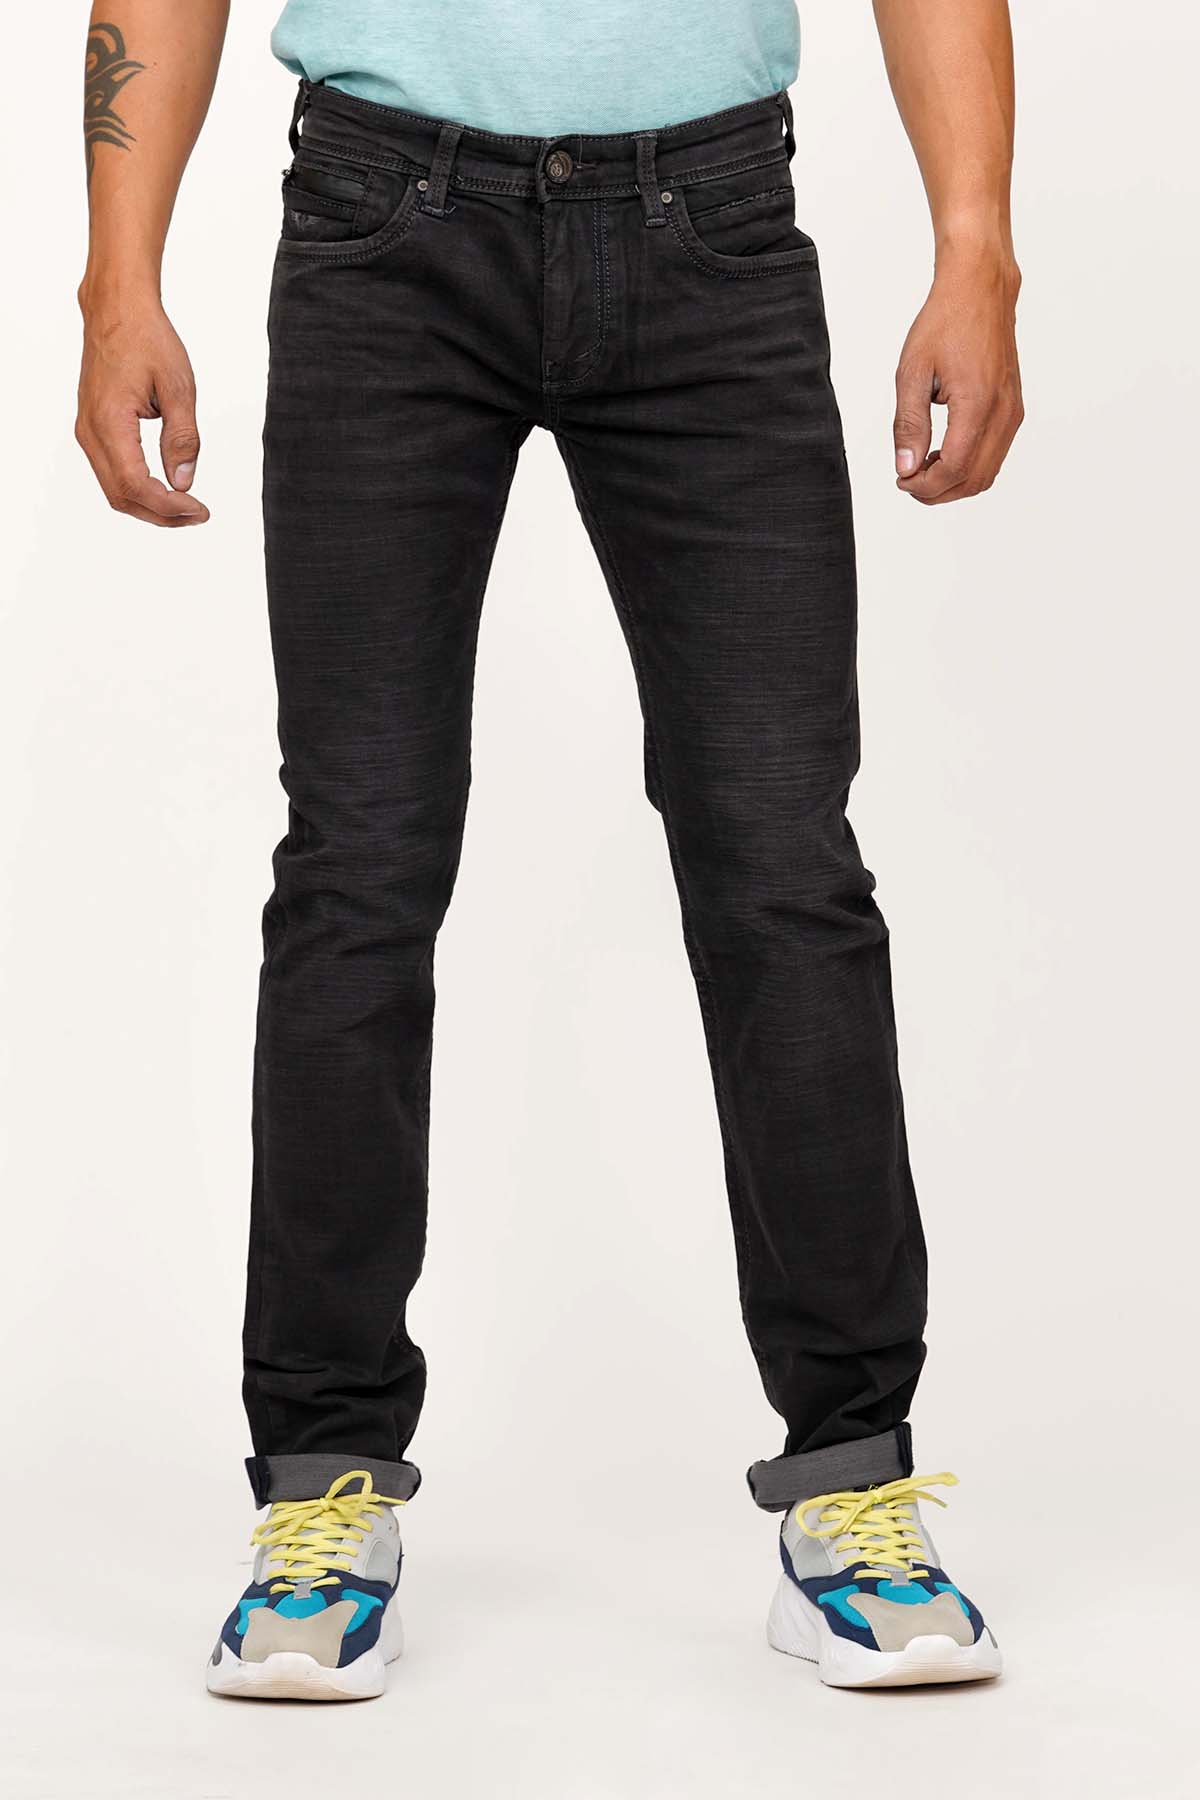 GREY 5 POCKET MID-RISE JEANS – ROOKIES